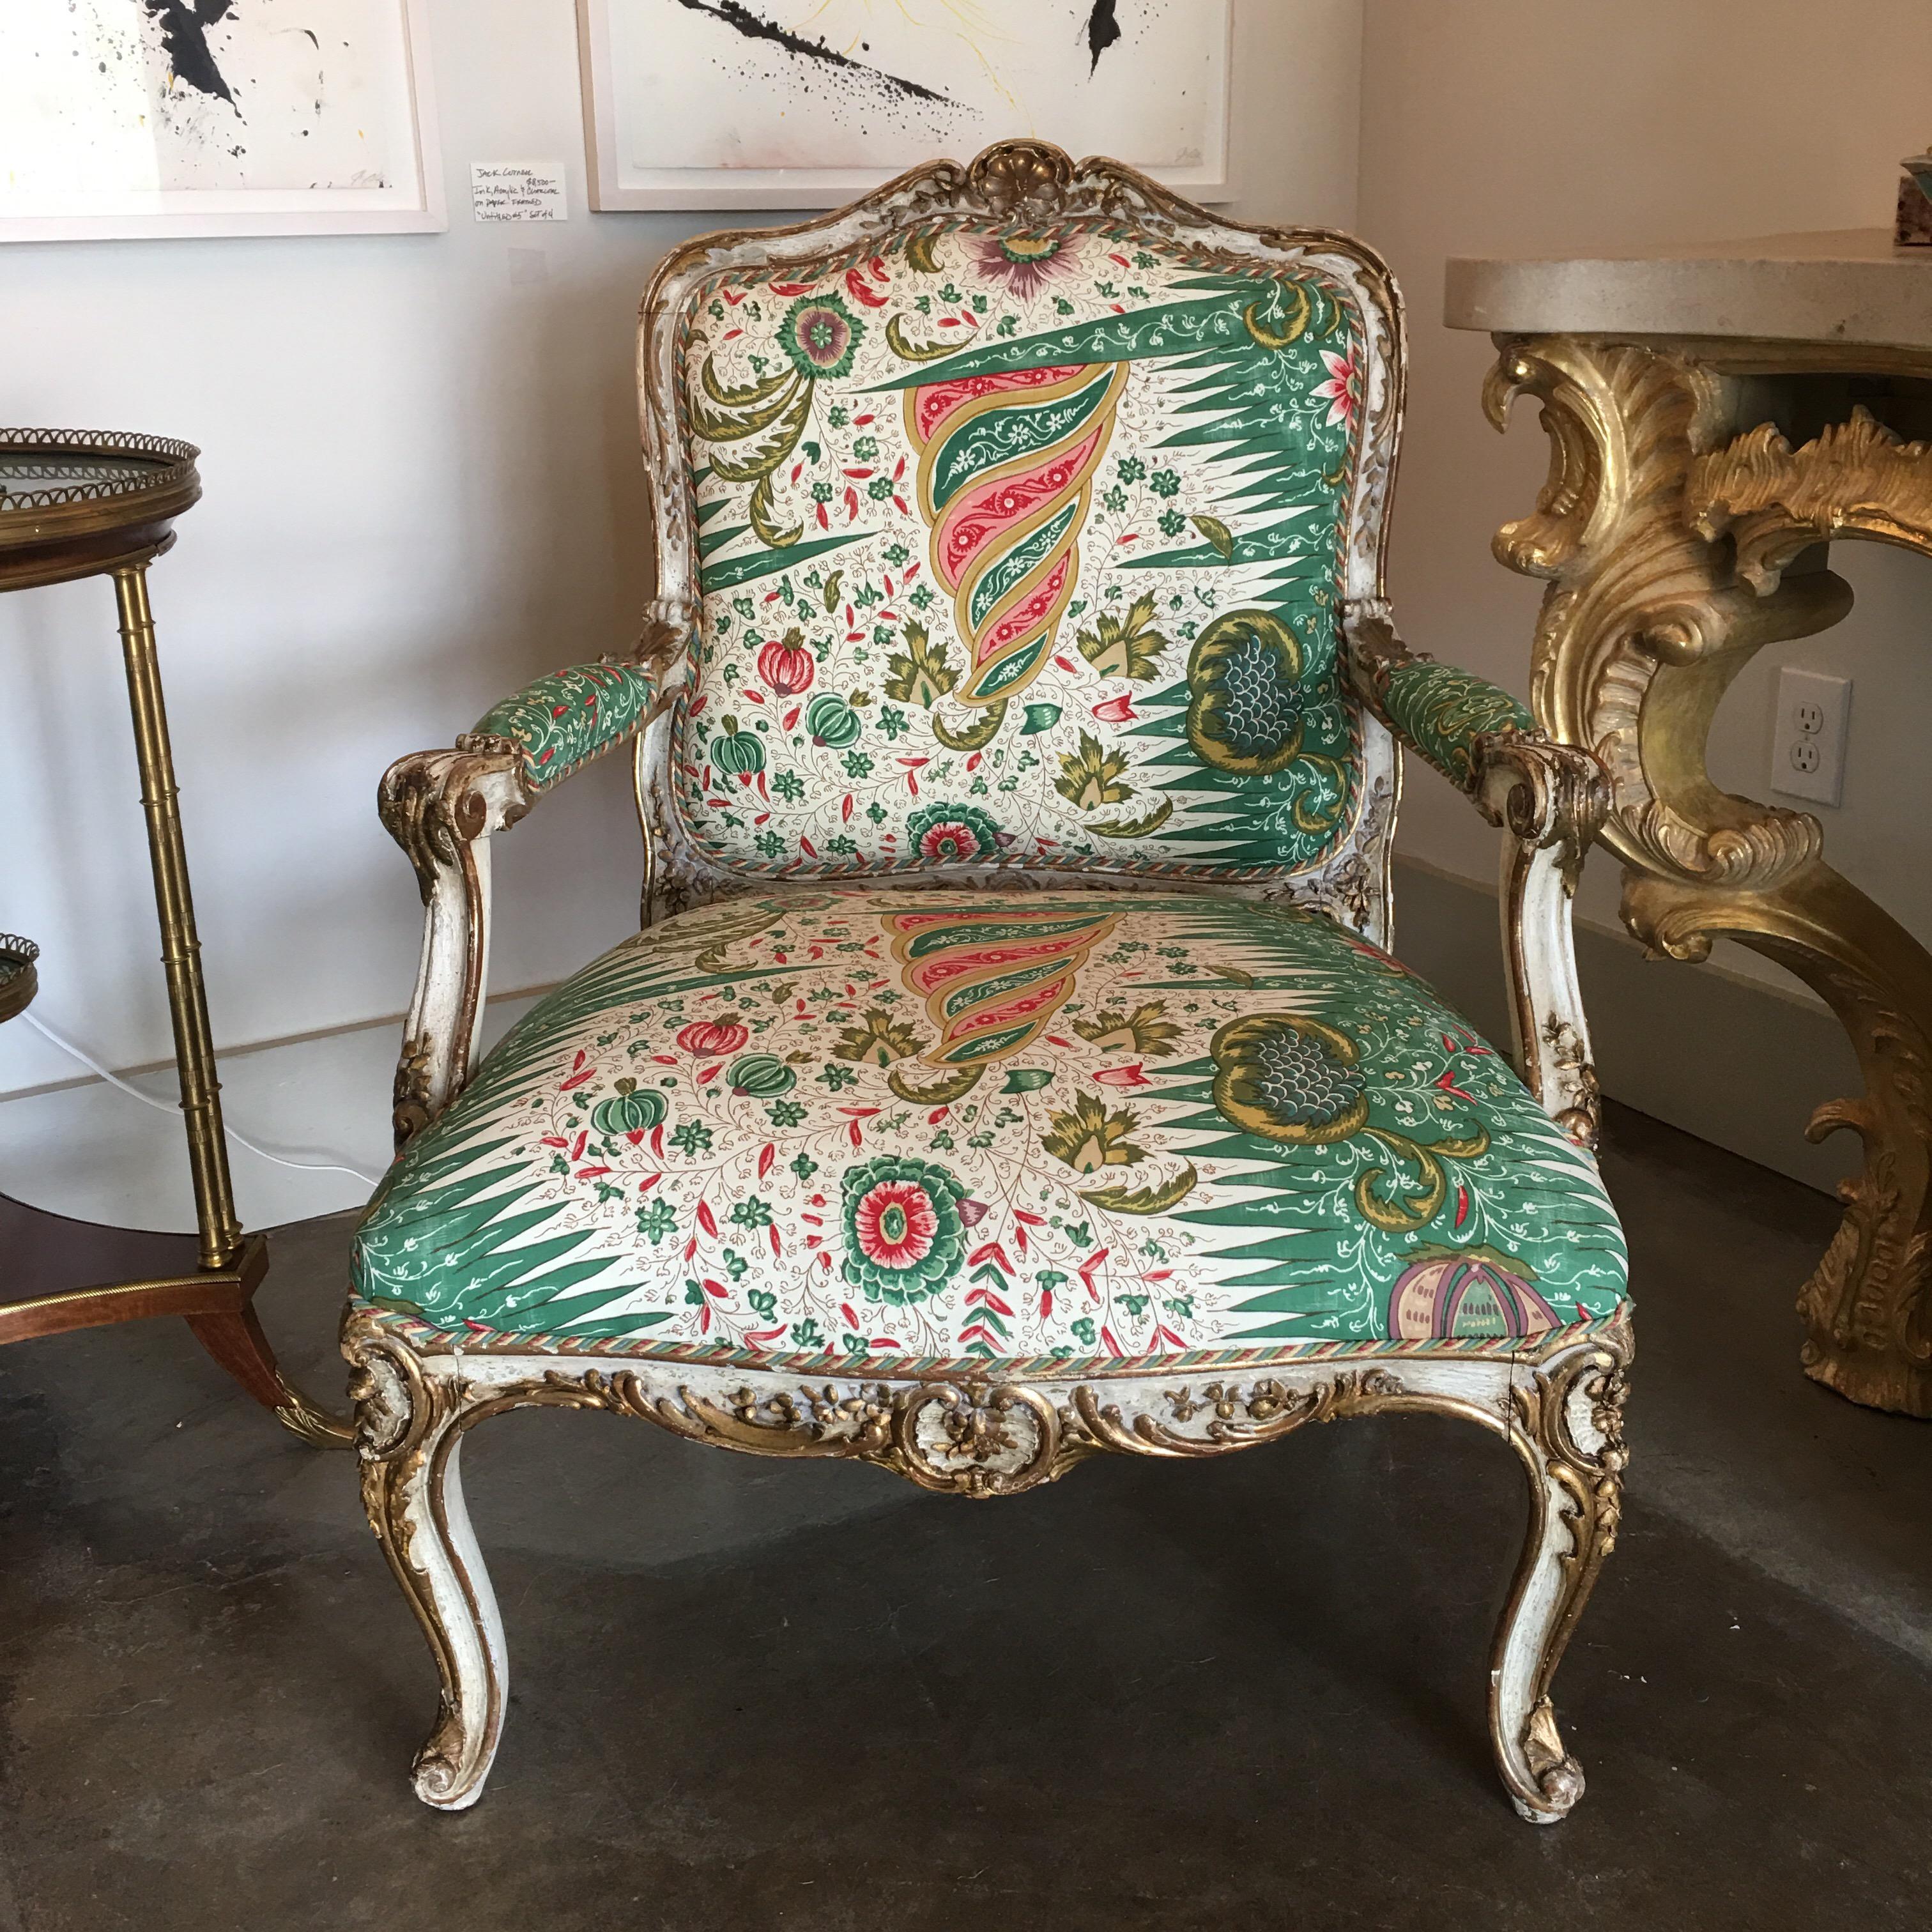 A large French Louis XV style fauteuil with a painting and parcel gilt finish. This comfortable arm chair is the perfect size to be used as a lounge chair in your space, The beautiful carved chair is painted white with gilded accents. The chair has